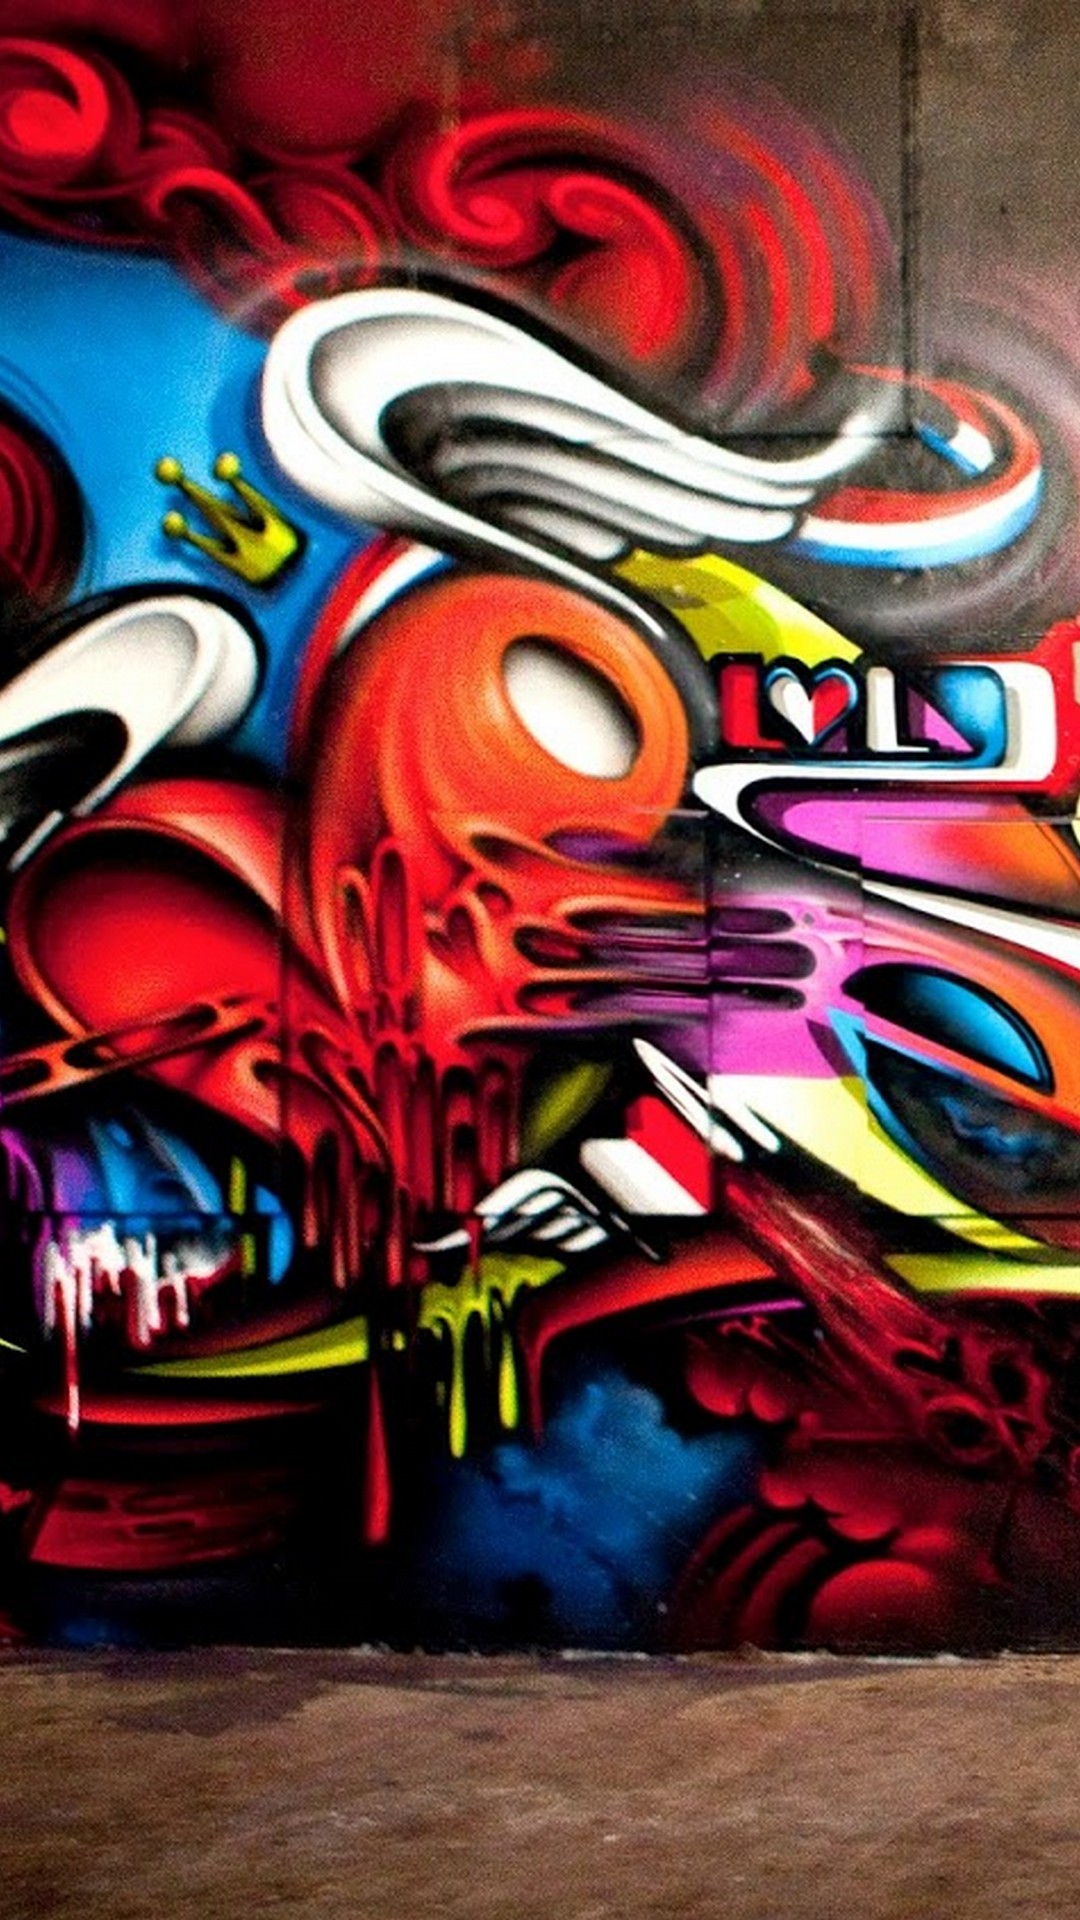 Graffiti Art iPhone Wallpaper with image resolution 1080x1920 pixel. You can make this wallpaper for your iPhone 5, 6, 7, 8, X backgrounds, Mobile Screensaver, or iPad Lock Screen